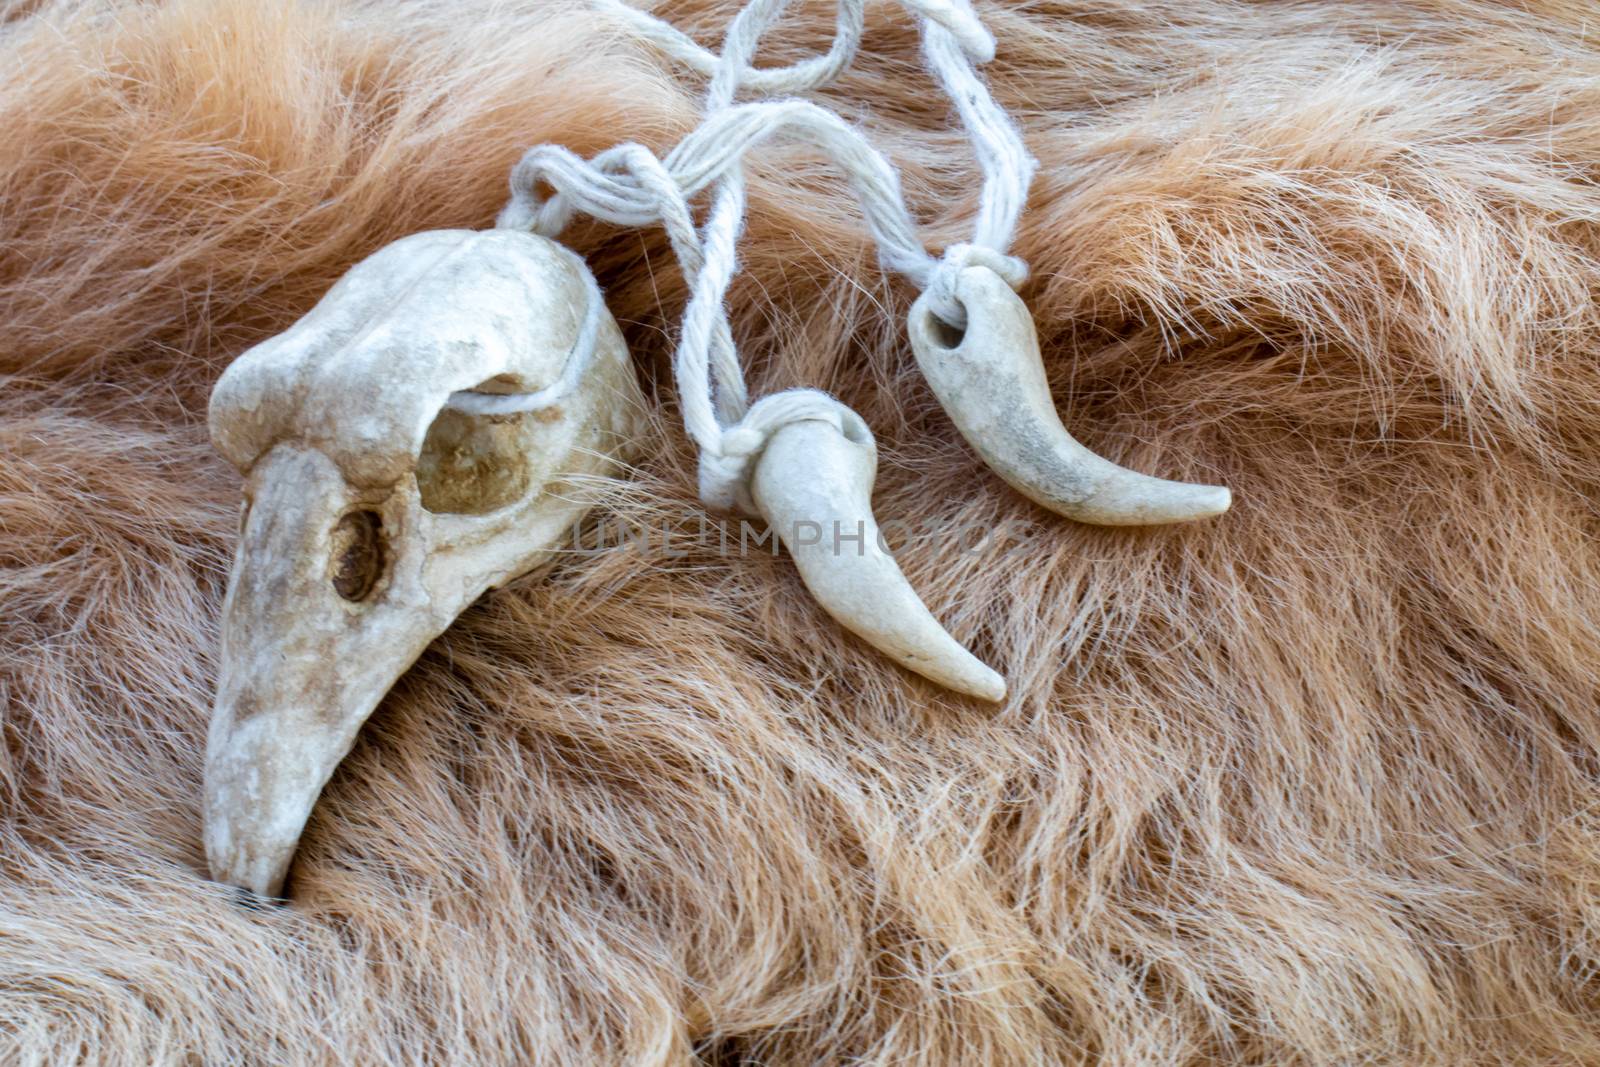 Bird skull on a fur. Necklace for rituals of a druid or magician.